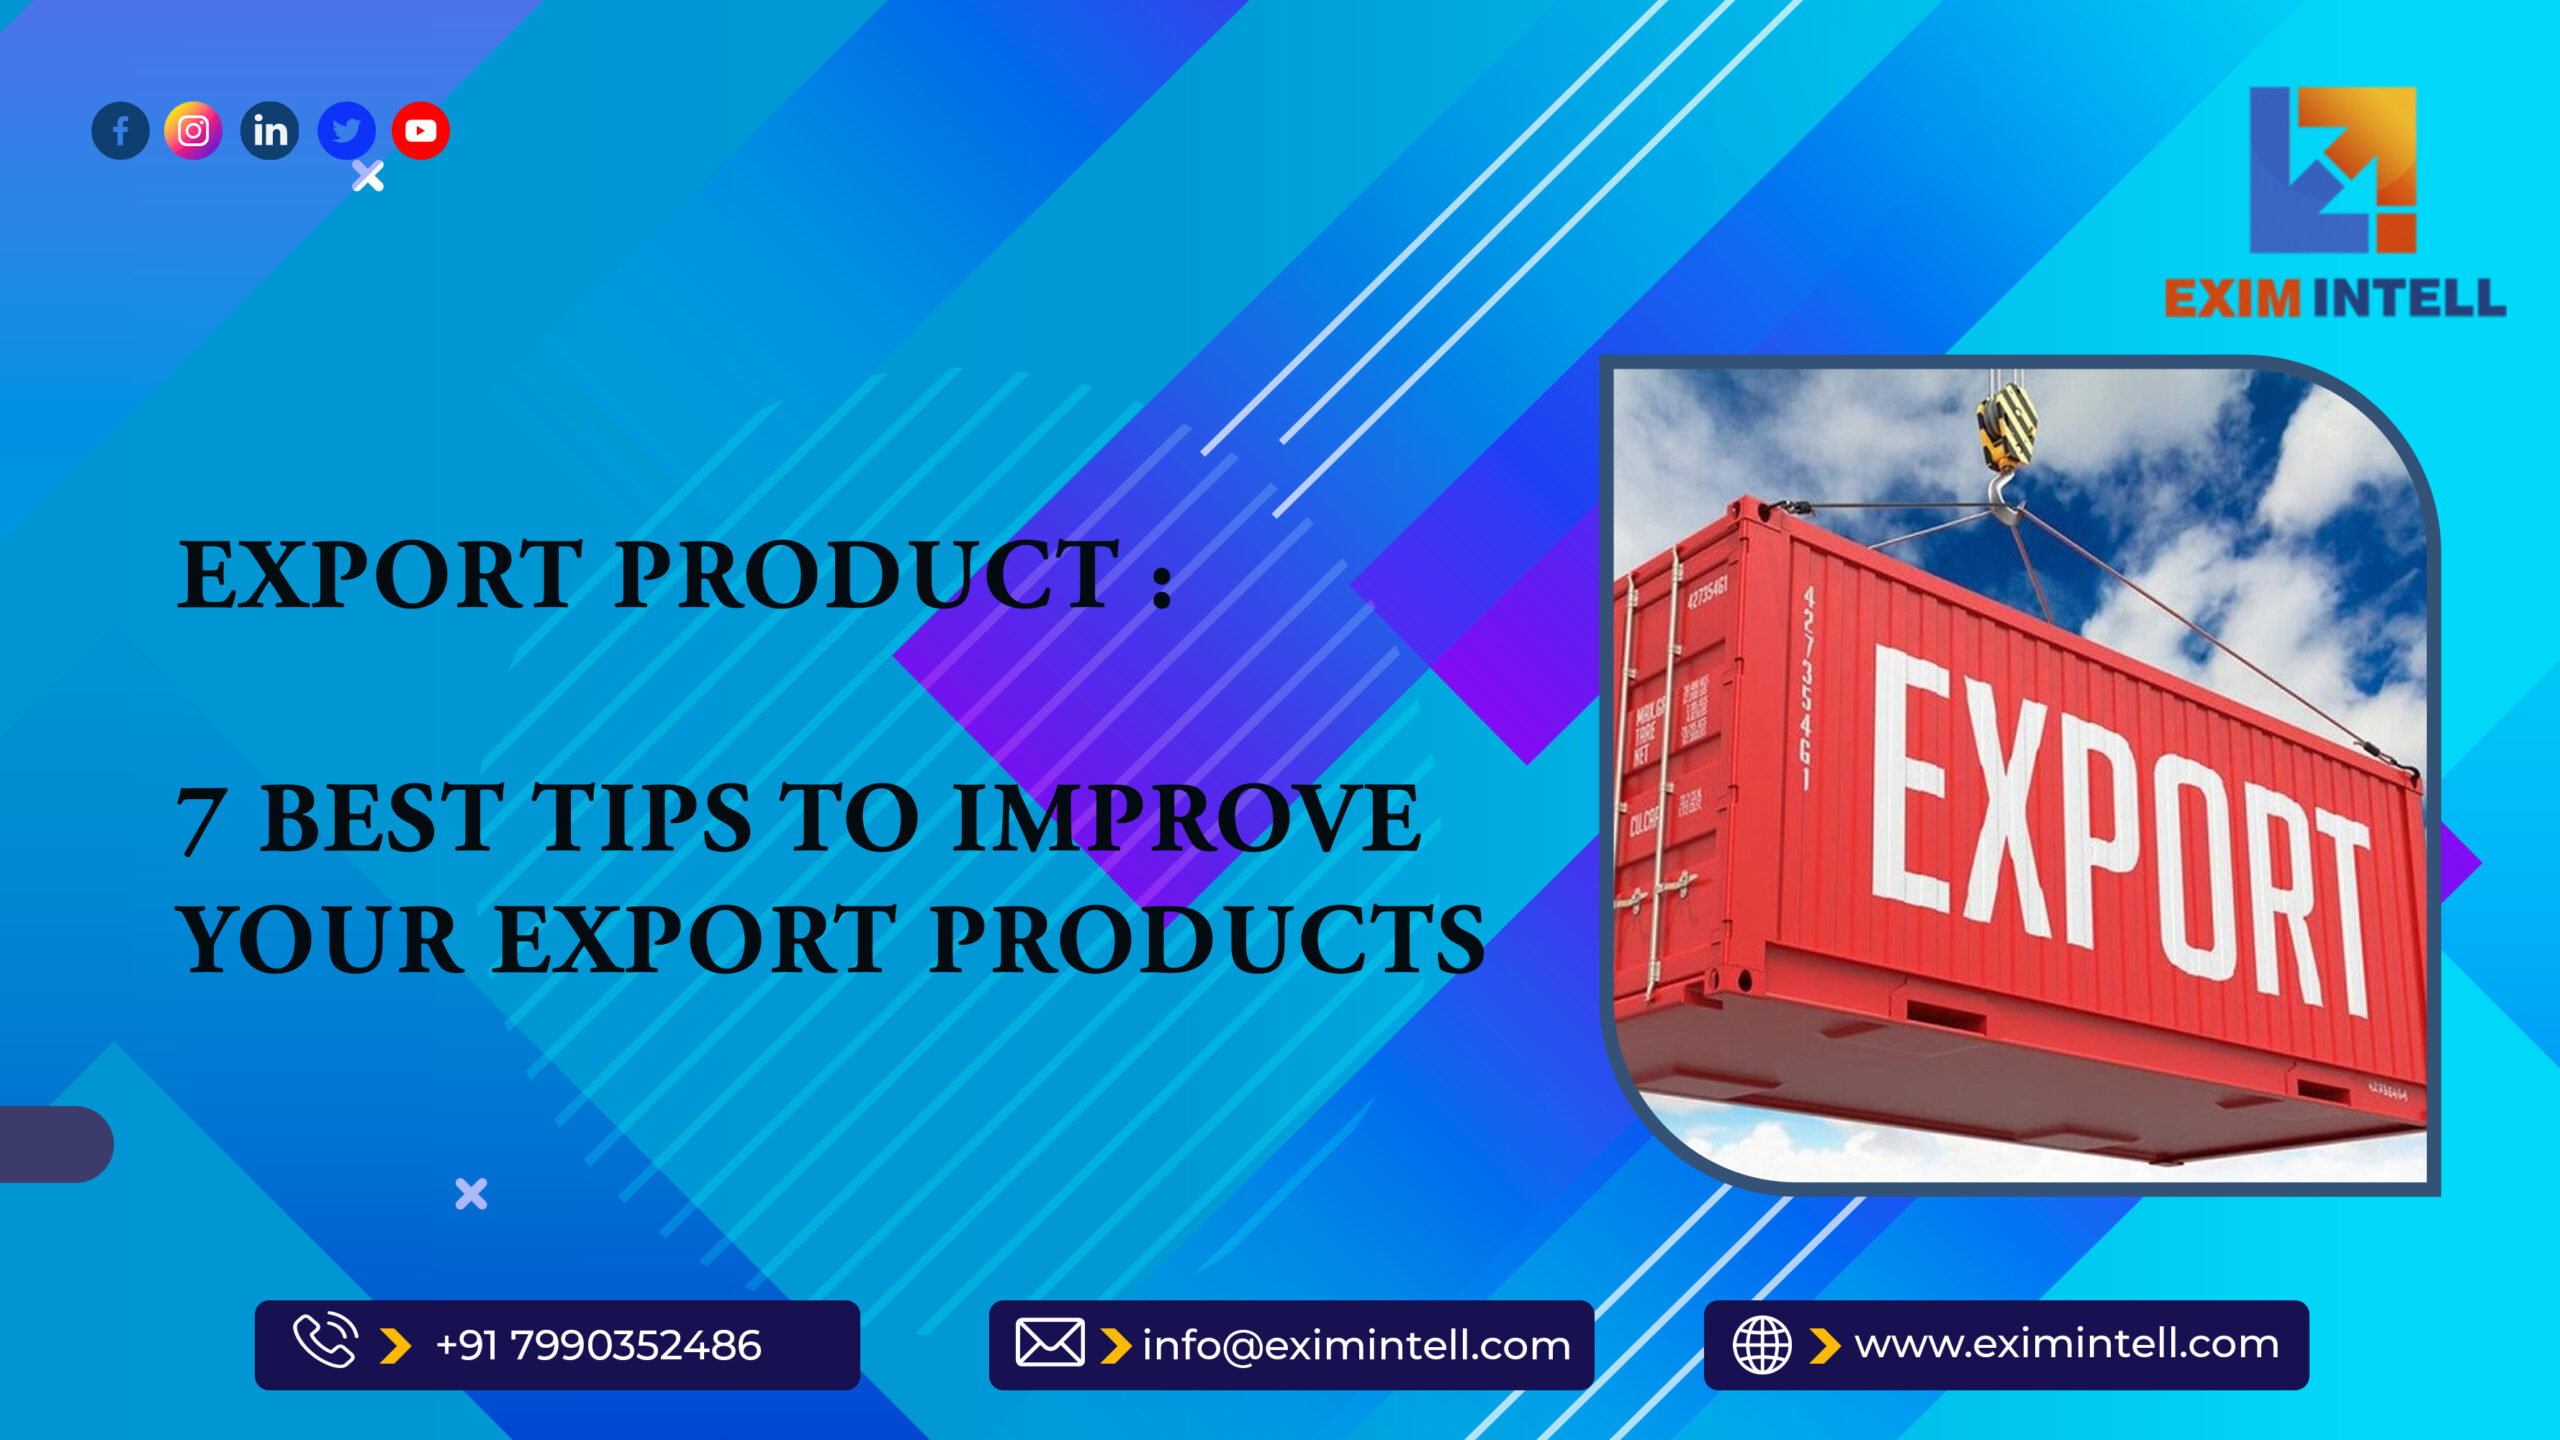 Export Product: 7 Best Tips To Improve Your Export Products